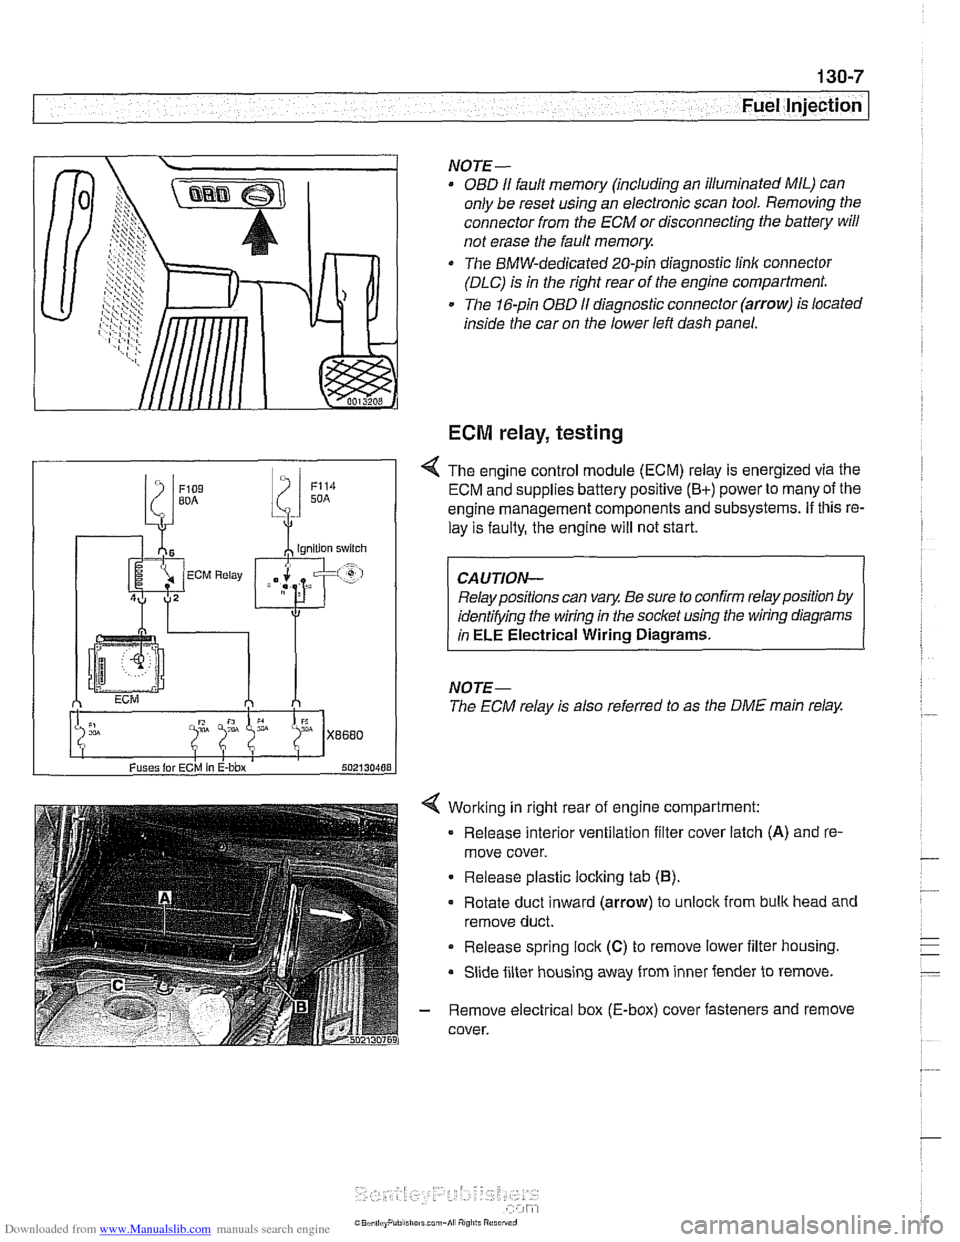 BMW 525i 1997 E39 Workshop Manual Downloaded from www.Manualslib.com manuals search engine 
Fuel Injection 1 
Working in right  rear of engine compartment: 
Release interior  ventilation filter cover  latch 
(A) and re- 
move cover. 
